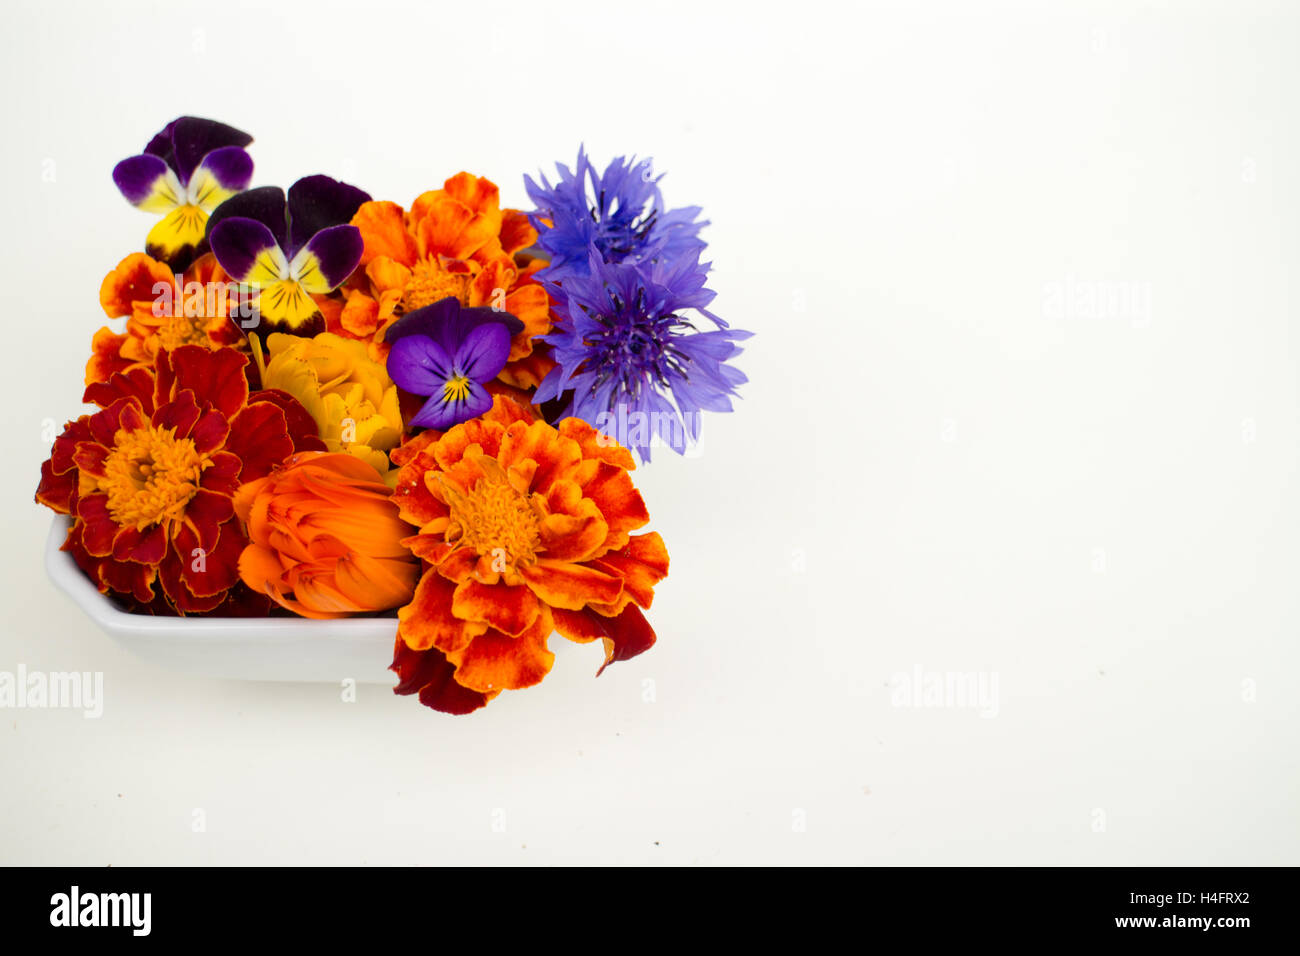 Edibles flowers together, pansy, marigold, calendulas, bachelor buttons, red flowers, orange flowers, purple flowers, blue Stock Photo